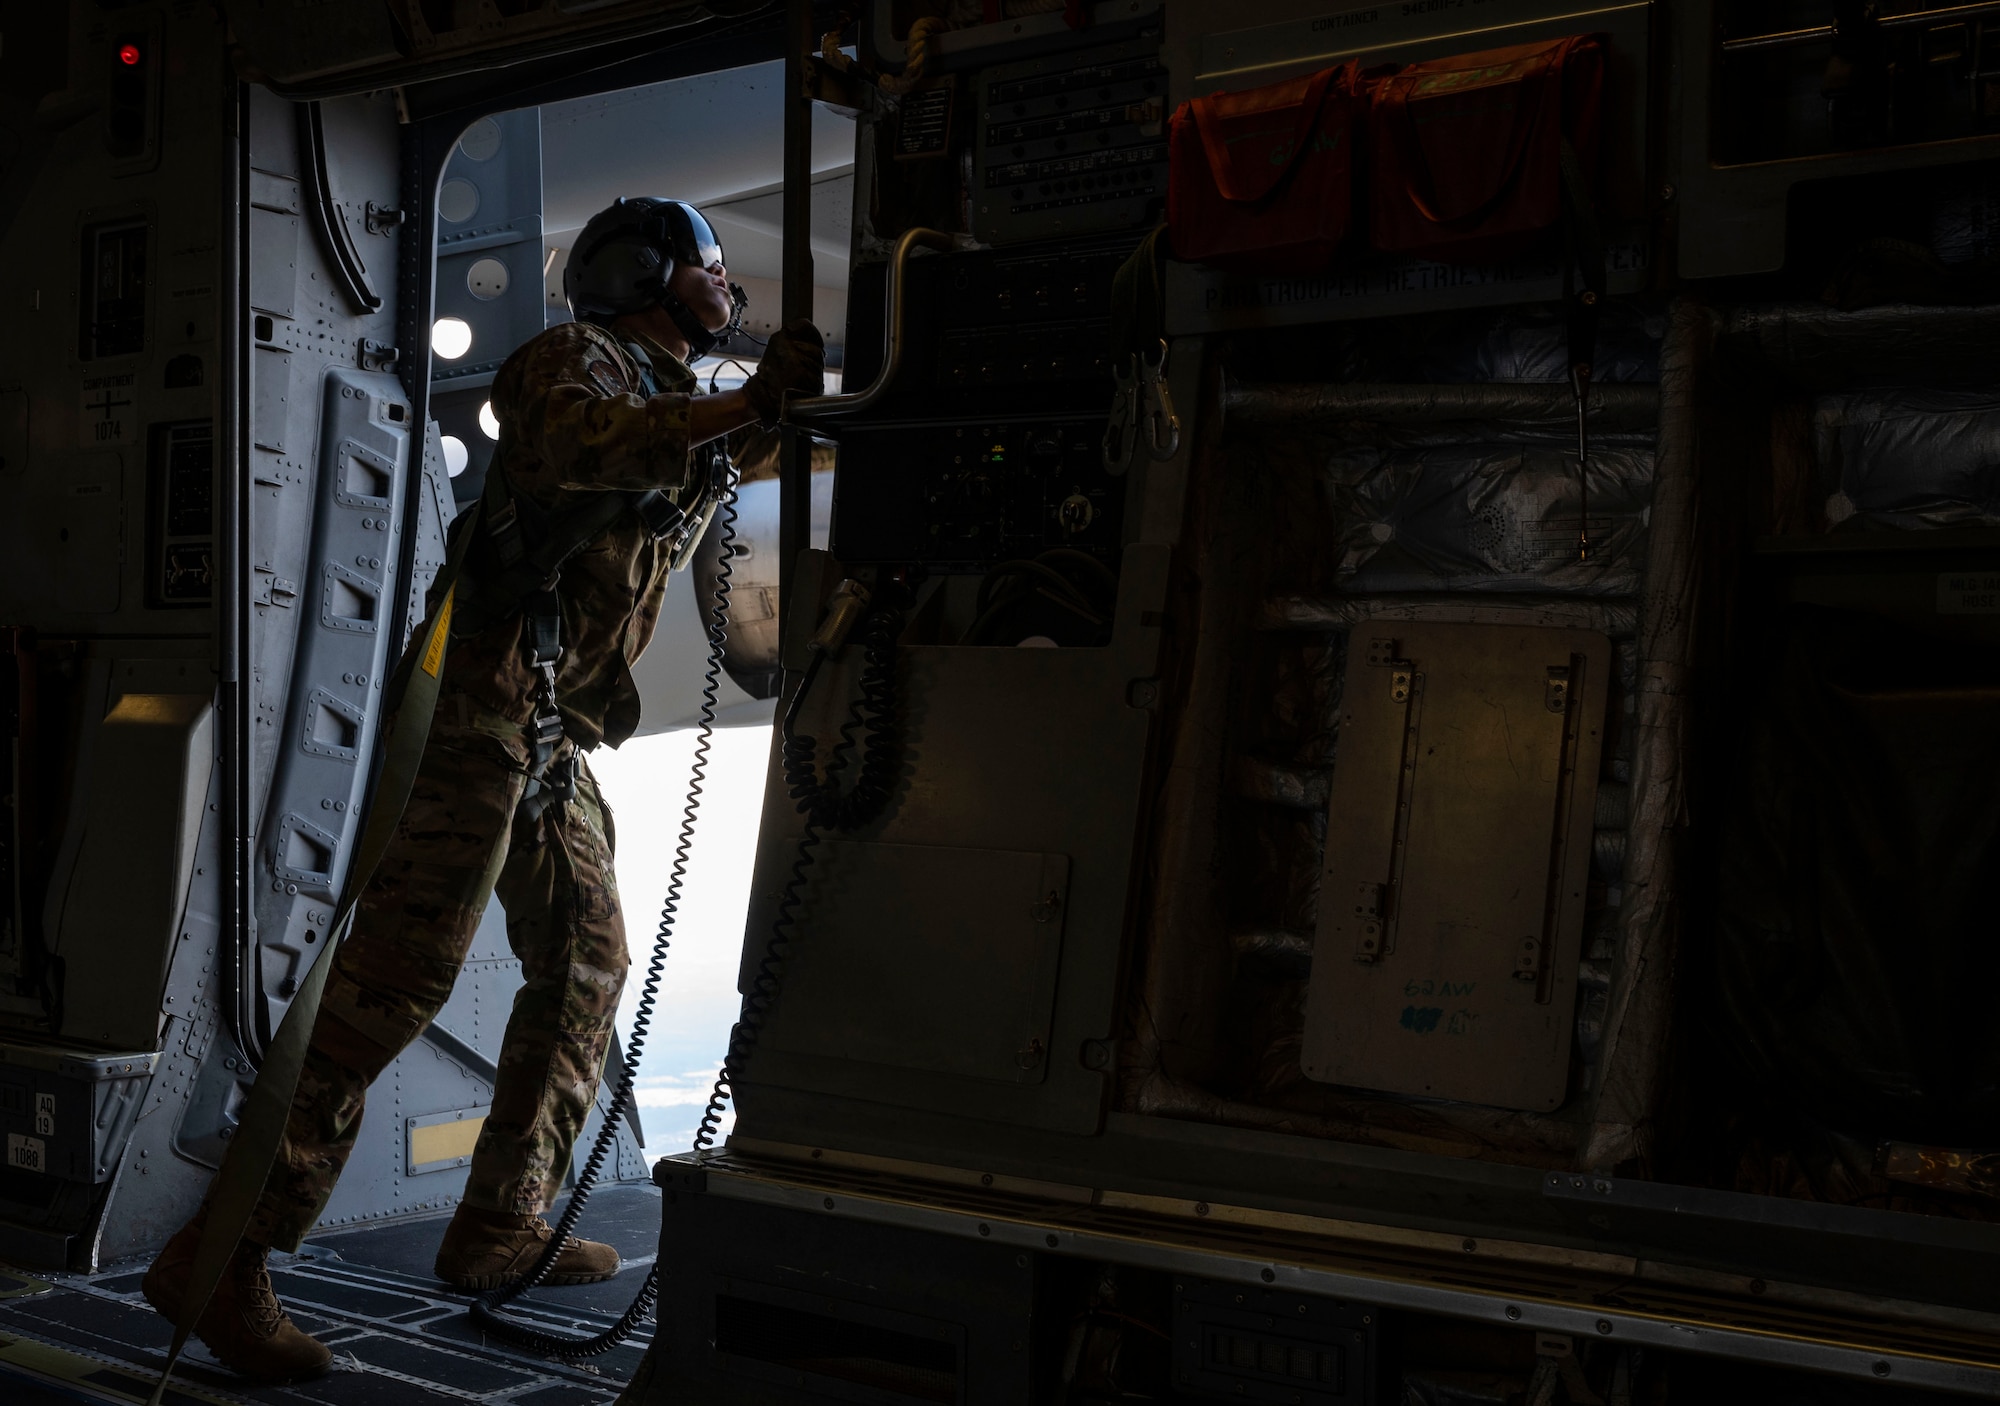 Senior Airman Keoni Gibson, 8th Airlift Squadron loadmaster, checks the perimeter of a door on a C-17 Globemaster III assigned to the 62nd Airlift Wing, Joint Base Lewis-McChord, Wash., prior to a static-line jump during Exercise Predictable Iron at Pope Army Airfield, Fort Bragg, N.C., Feb. 25, 2021. The exercise provided the opportunity for the U.S. Air Force and U.S. Army to strengthen their skill sets together and accomplish the Department of Defense’s mission to provide combat-credible military forces.